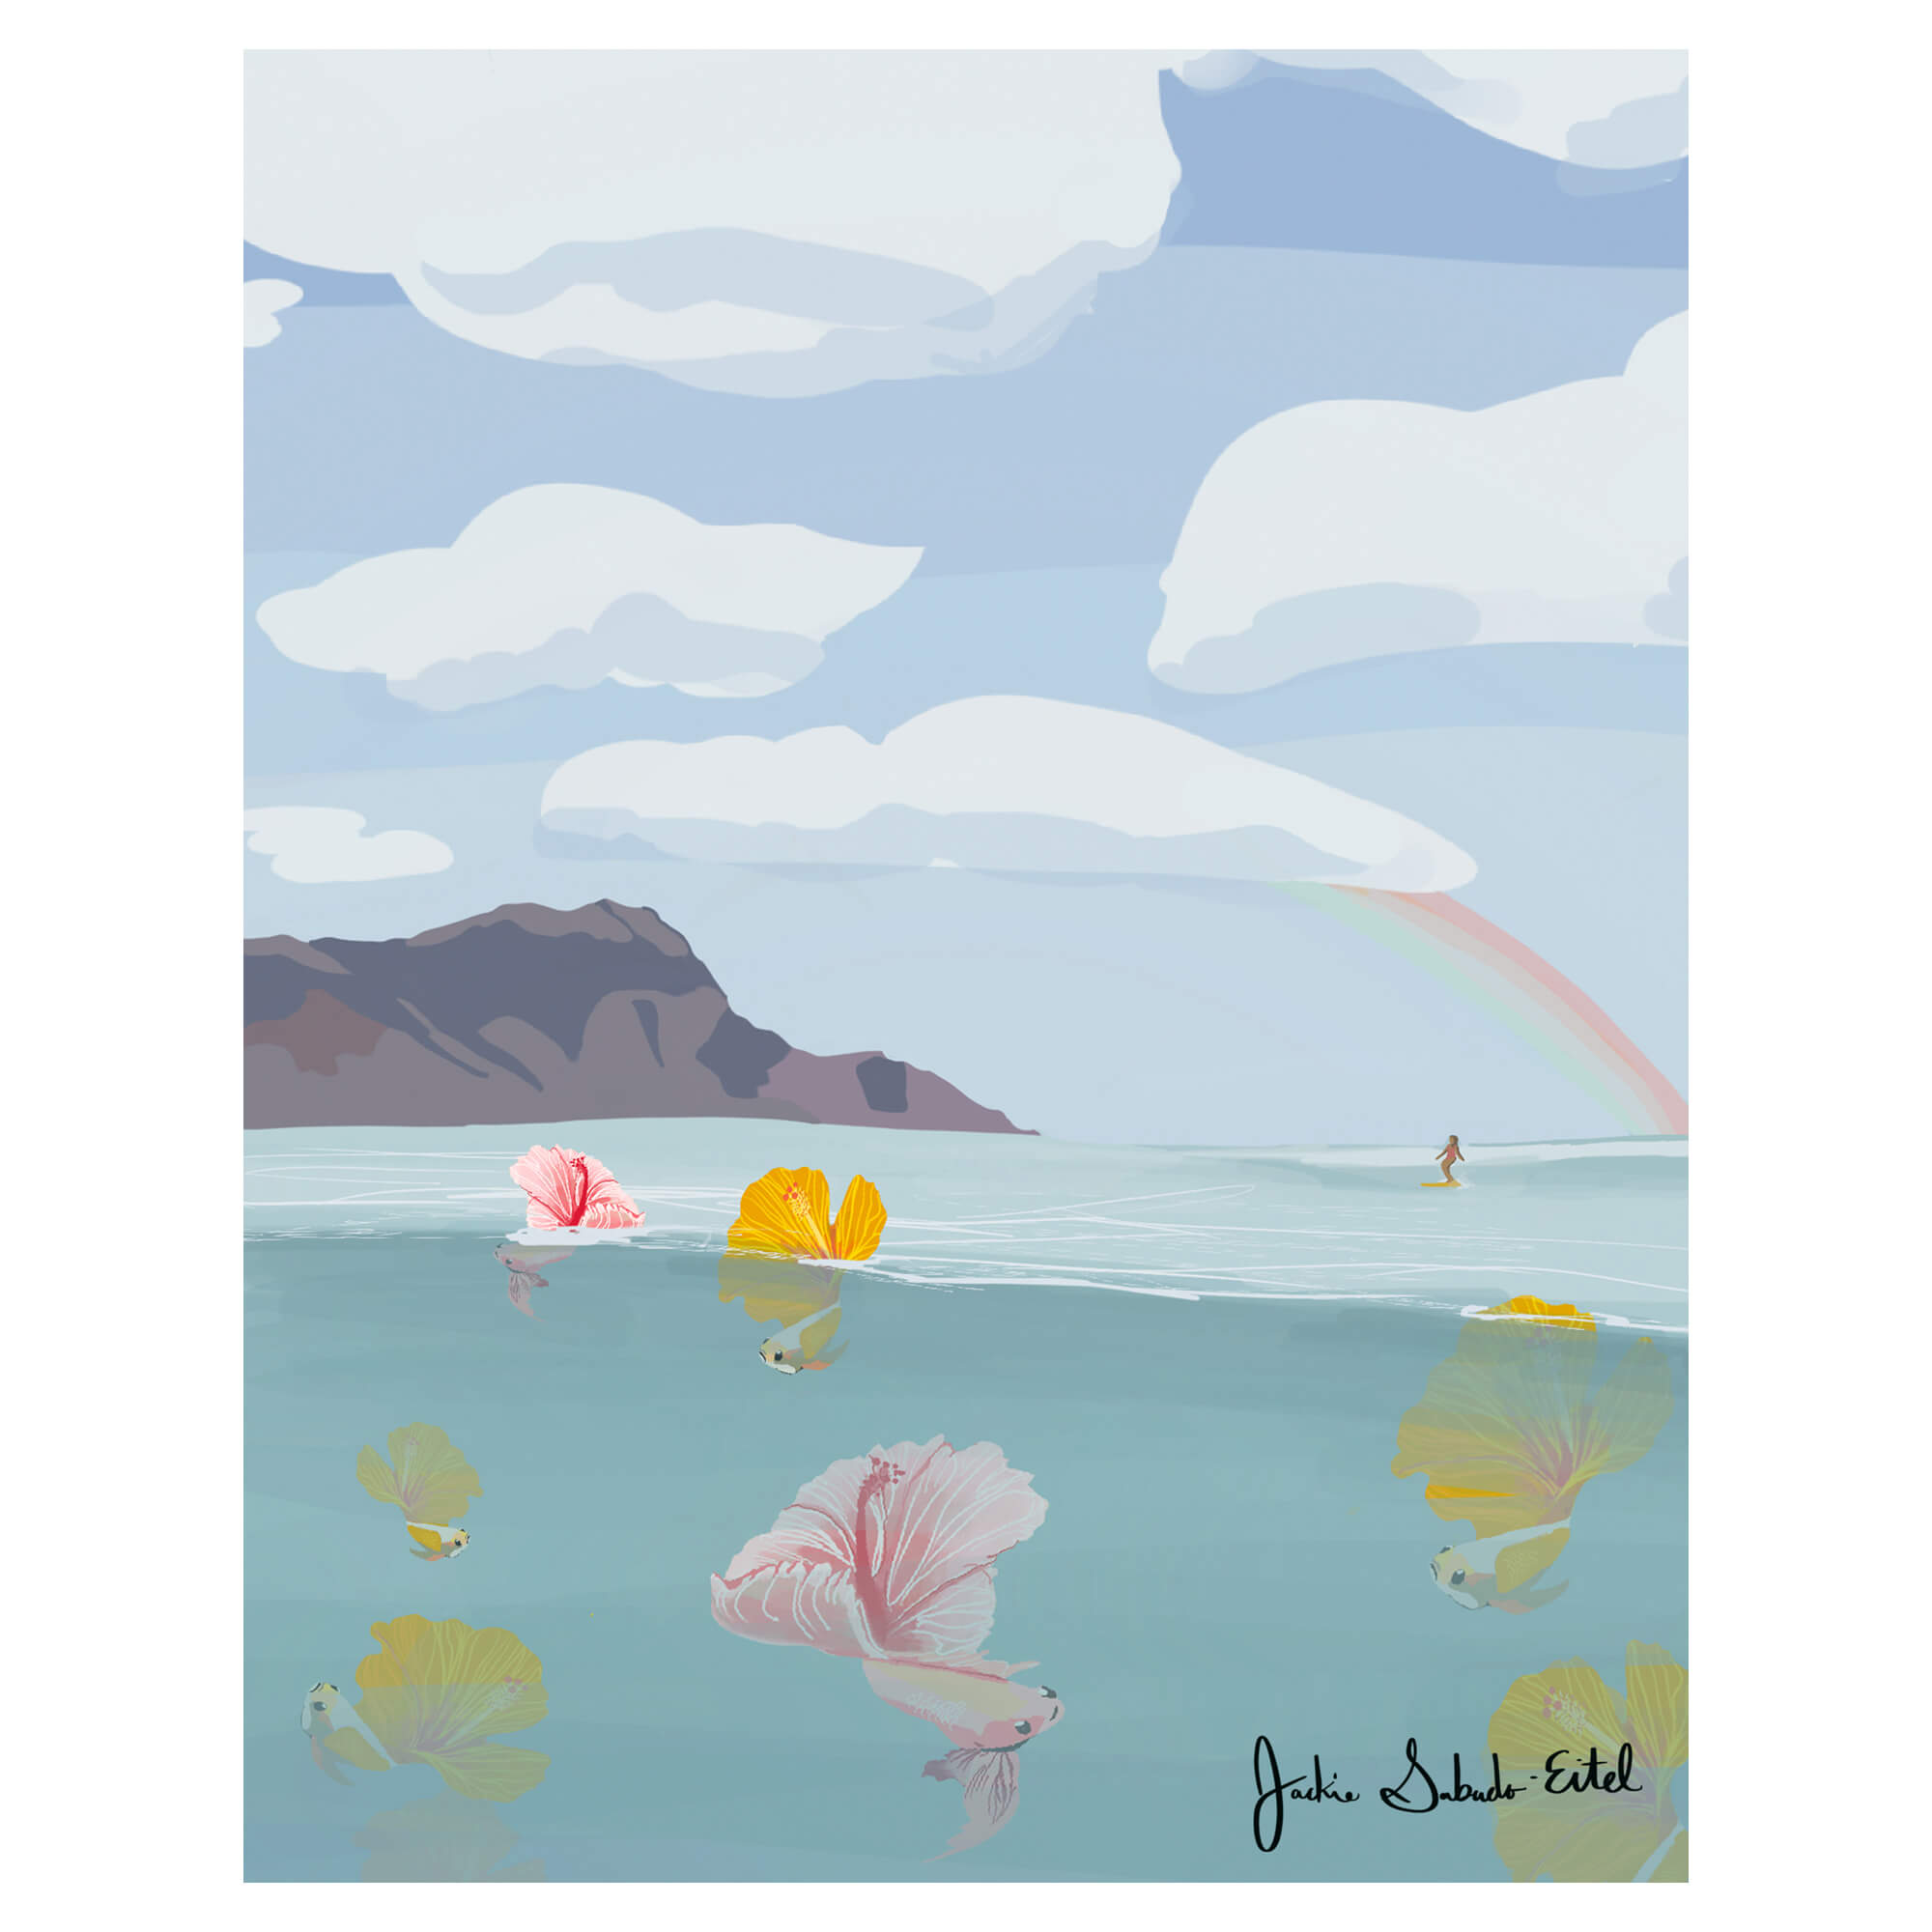 A matted art print featuring colorful tropical fish with hibiscus flowers as their tails, the Diamond Head in the background with a woman surfing by Hawaii artist Jackie Eitel